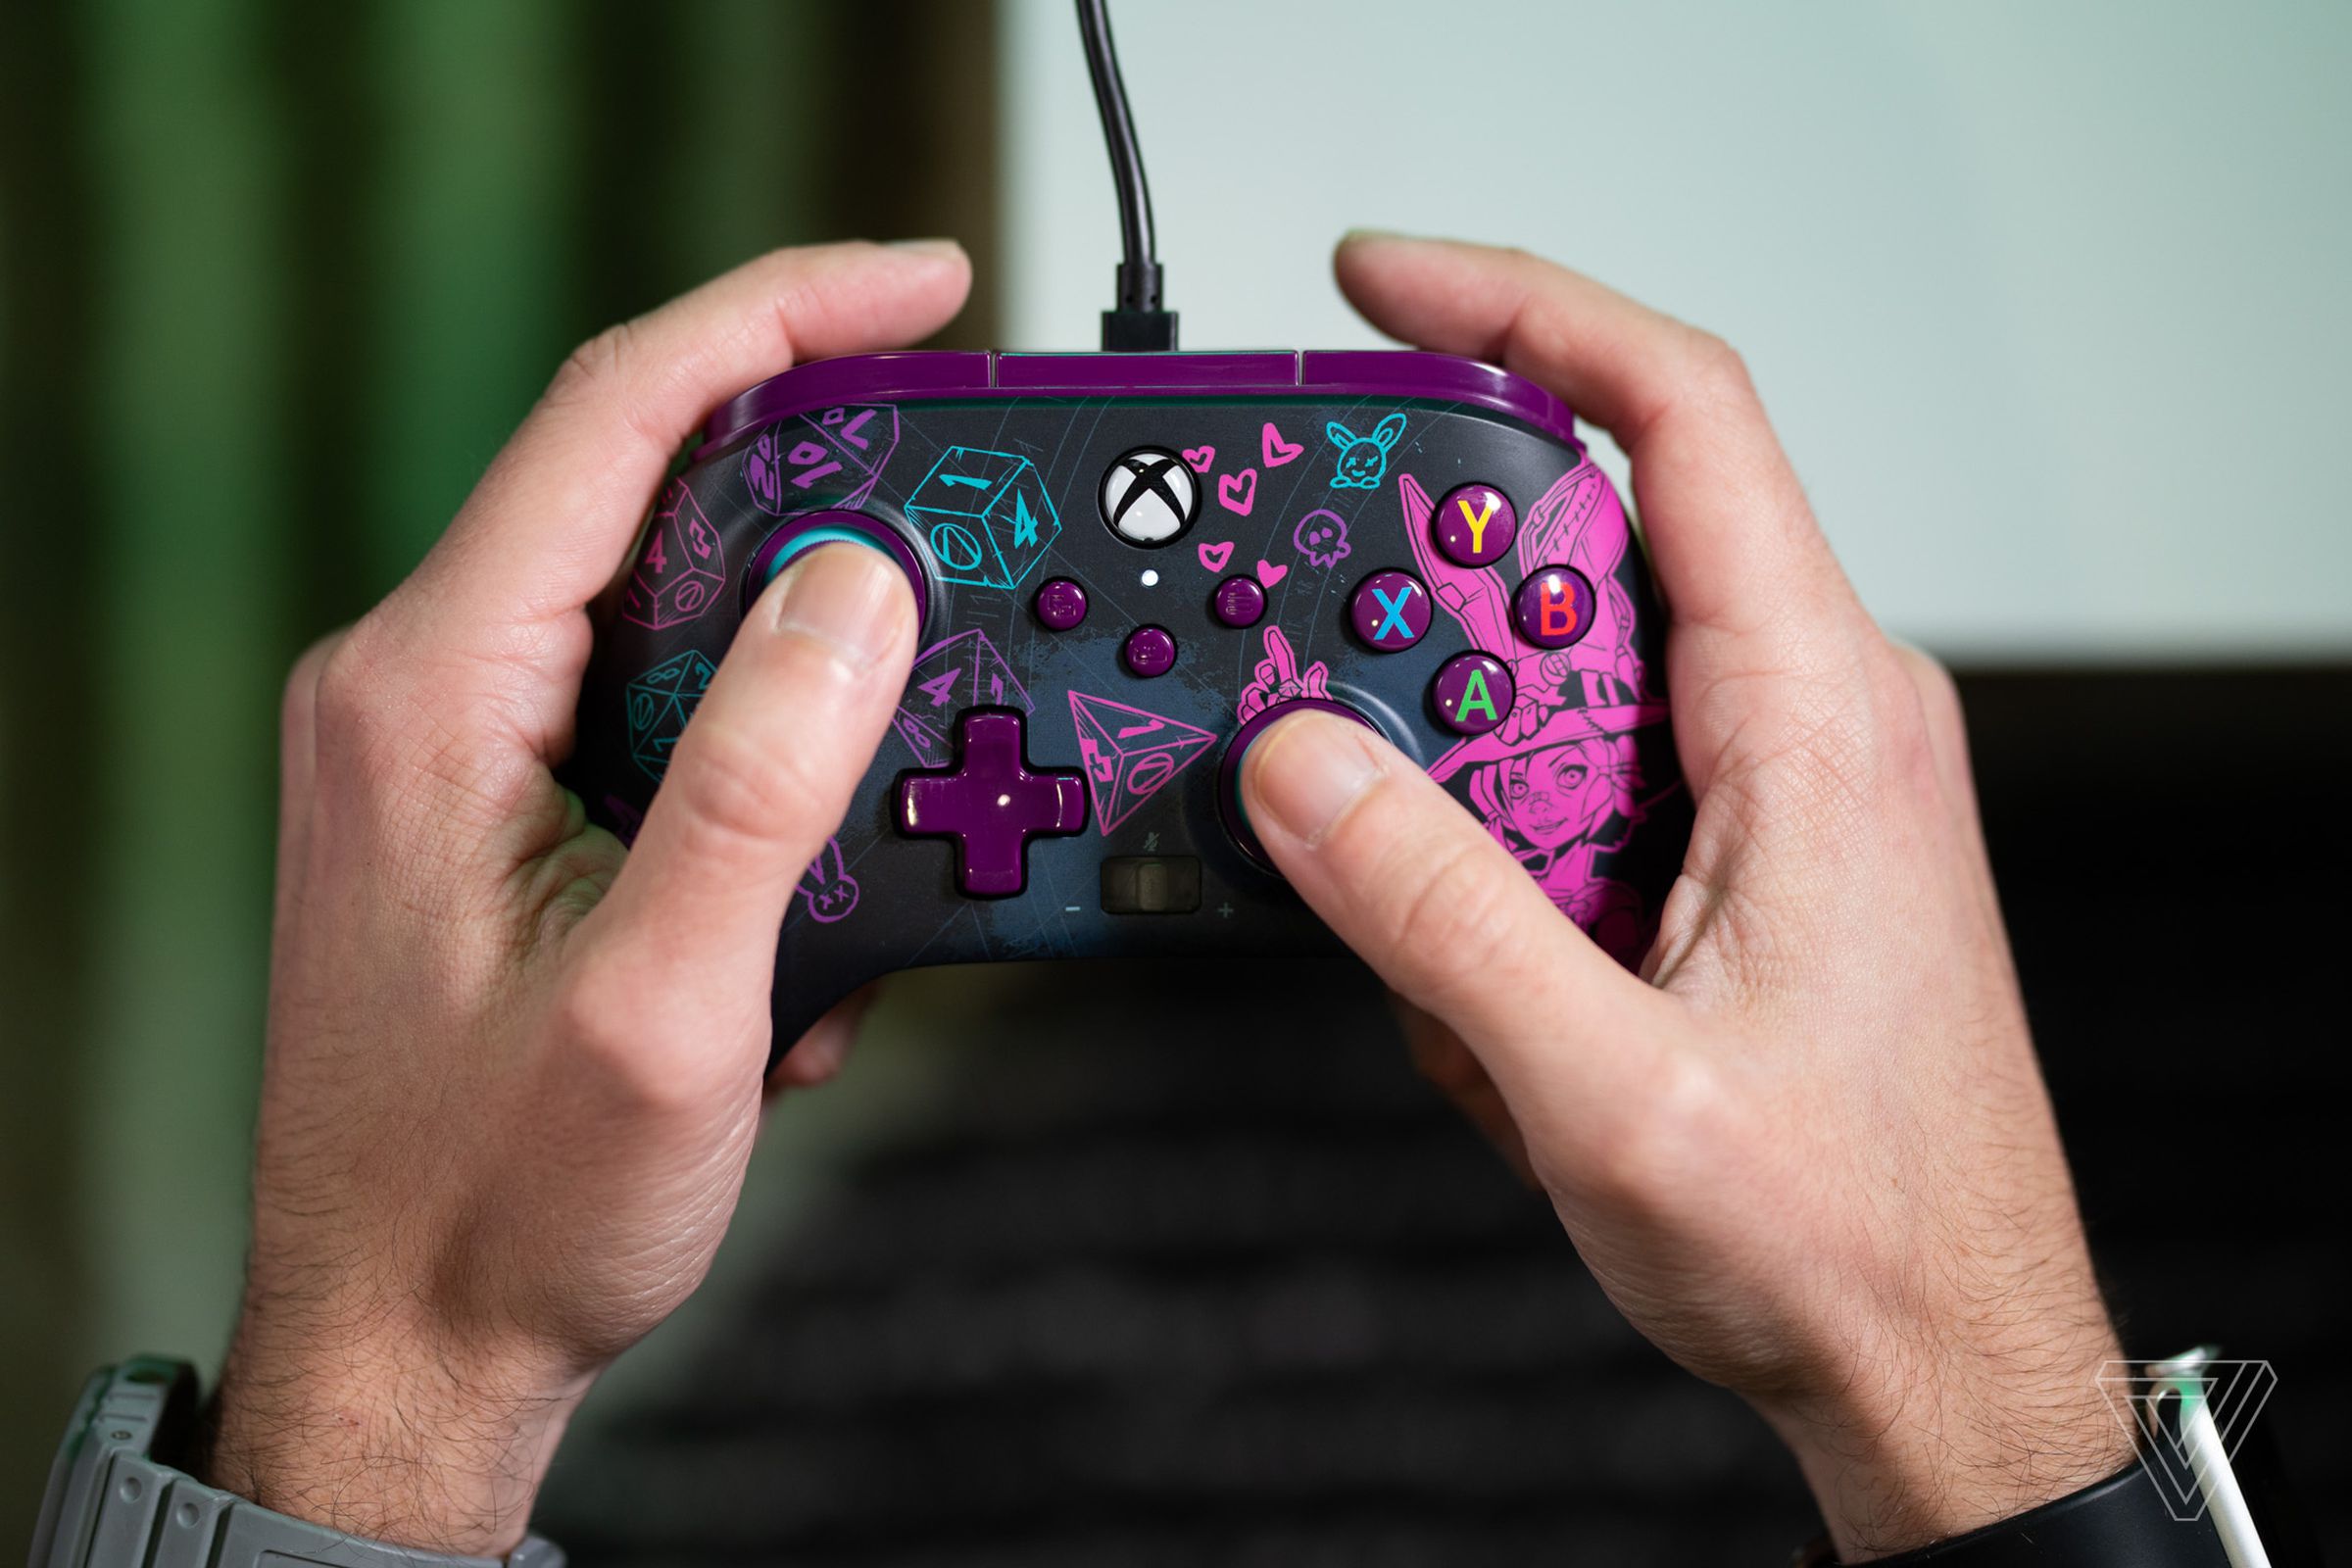 PowerA’s Enhanced Wired Controller is quite a great bargain, with all kinds of colors and unique designs.